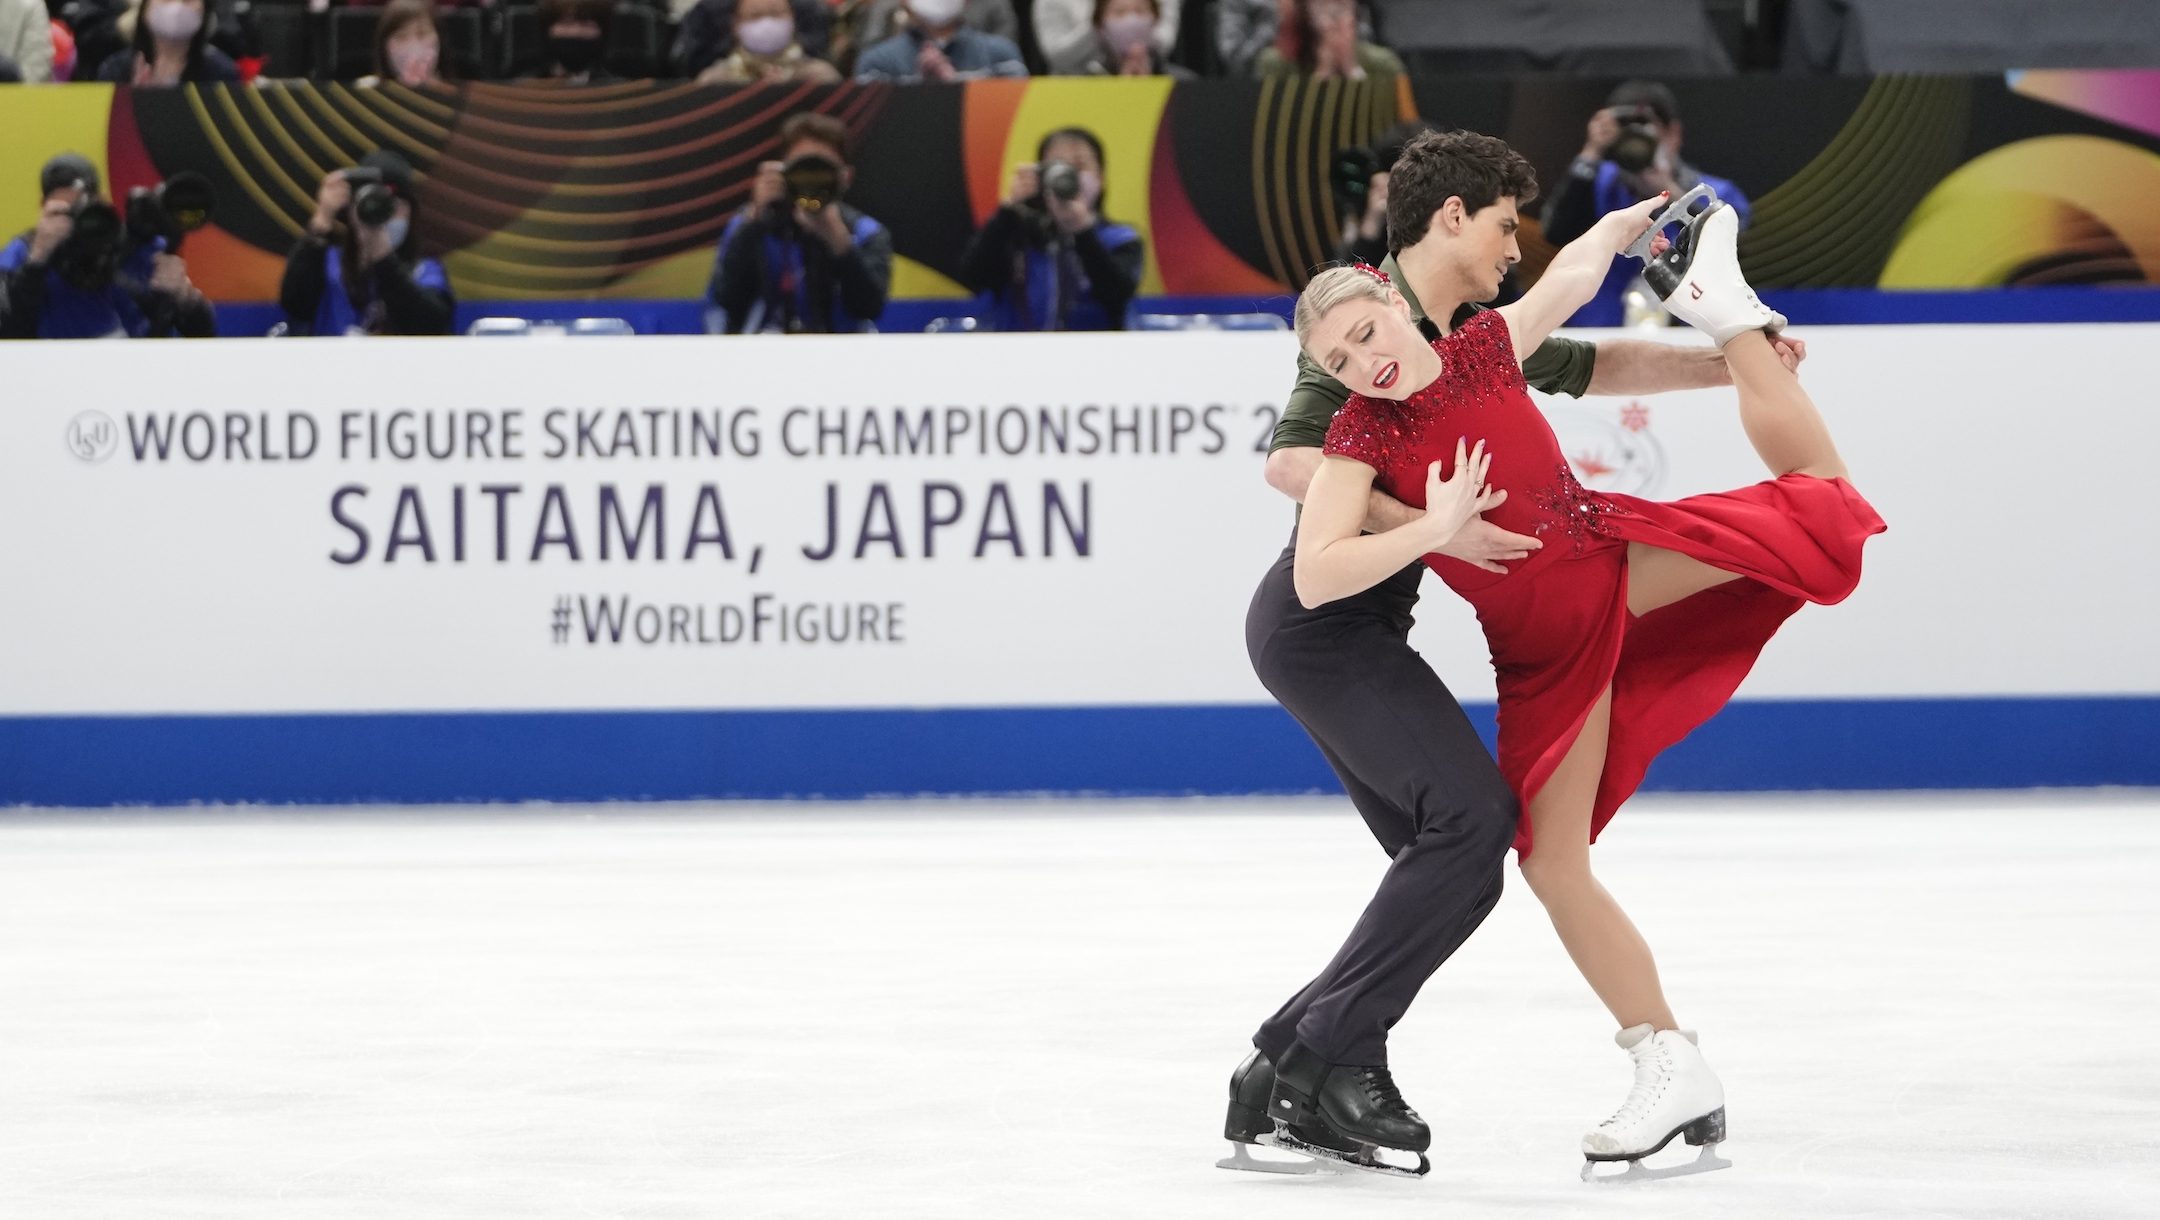 Piper Gilles and Paul Poirier win bronze at the World Figure Skating Championships - Team Canada